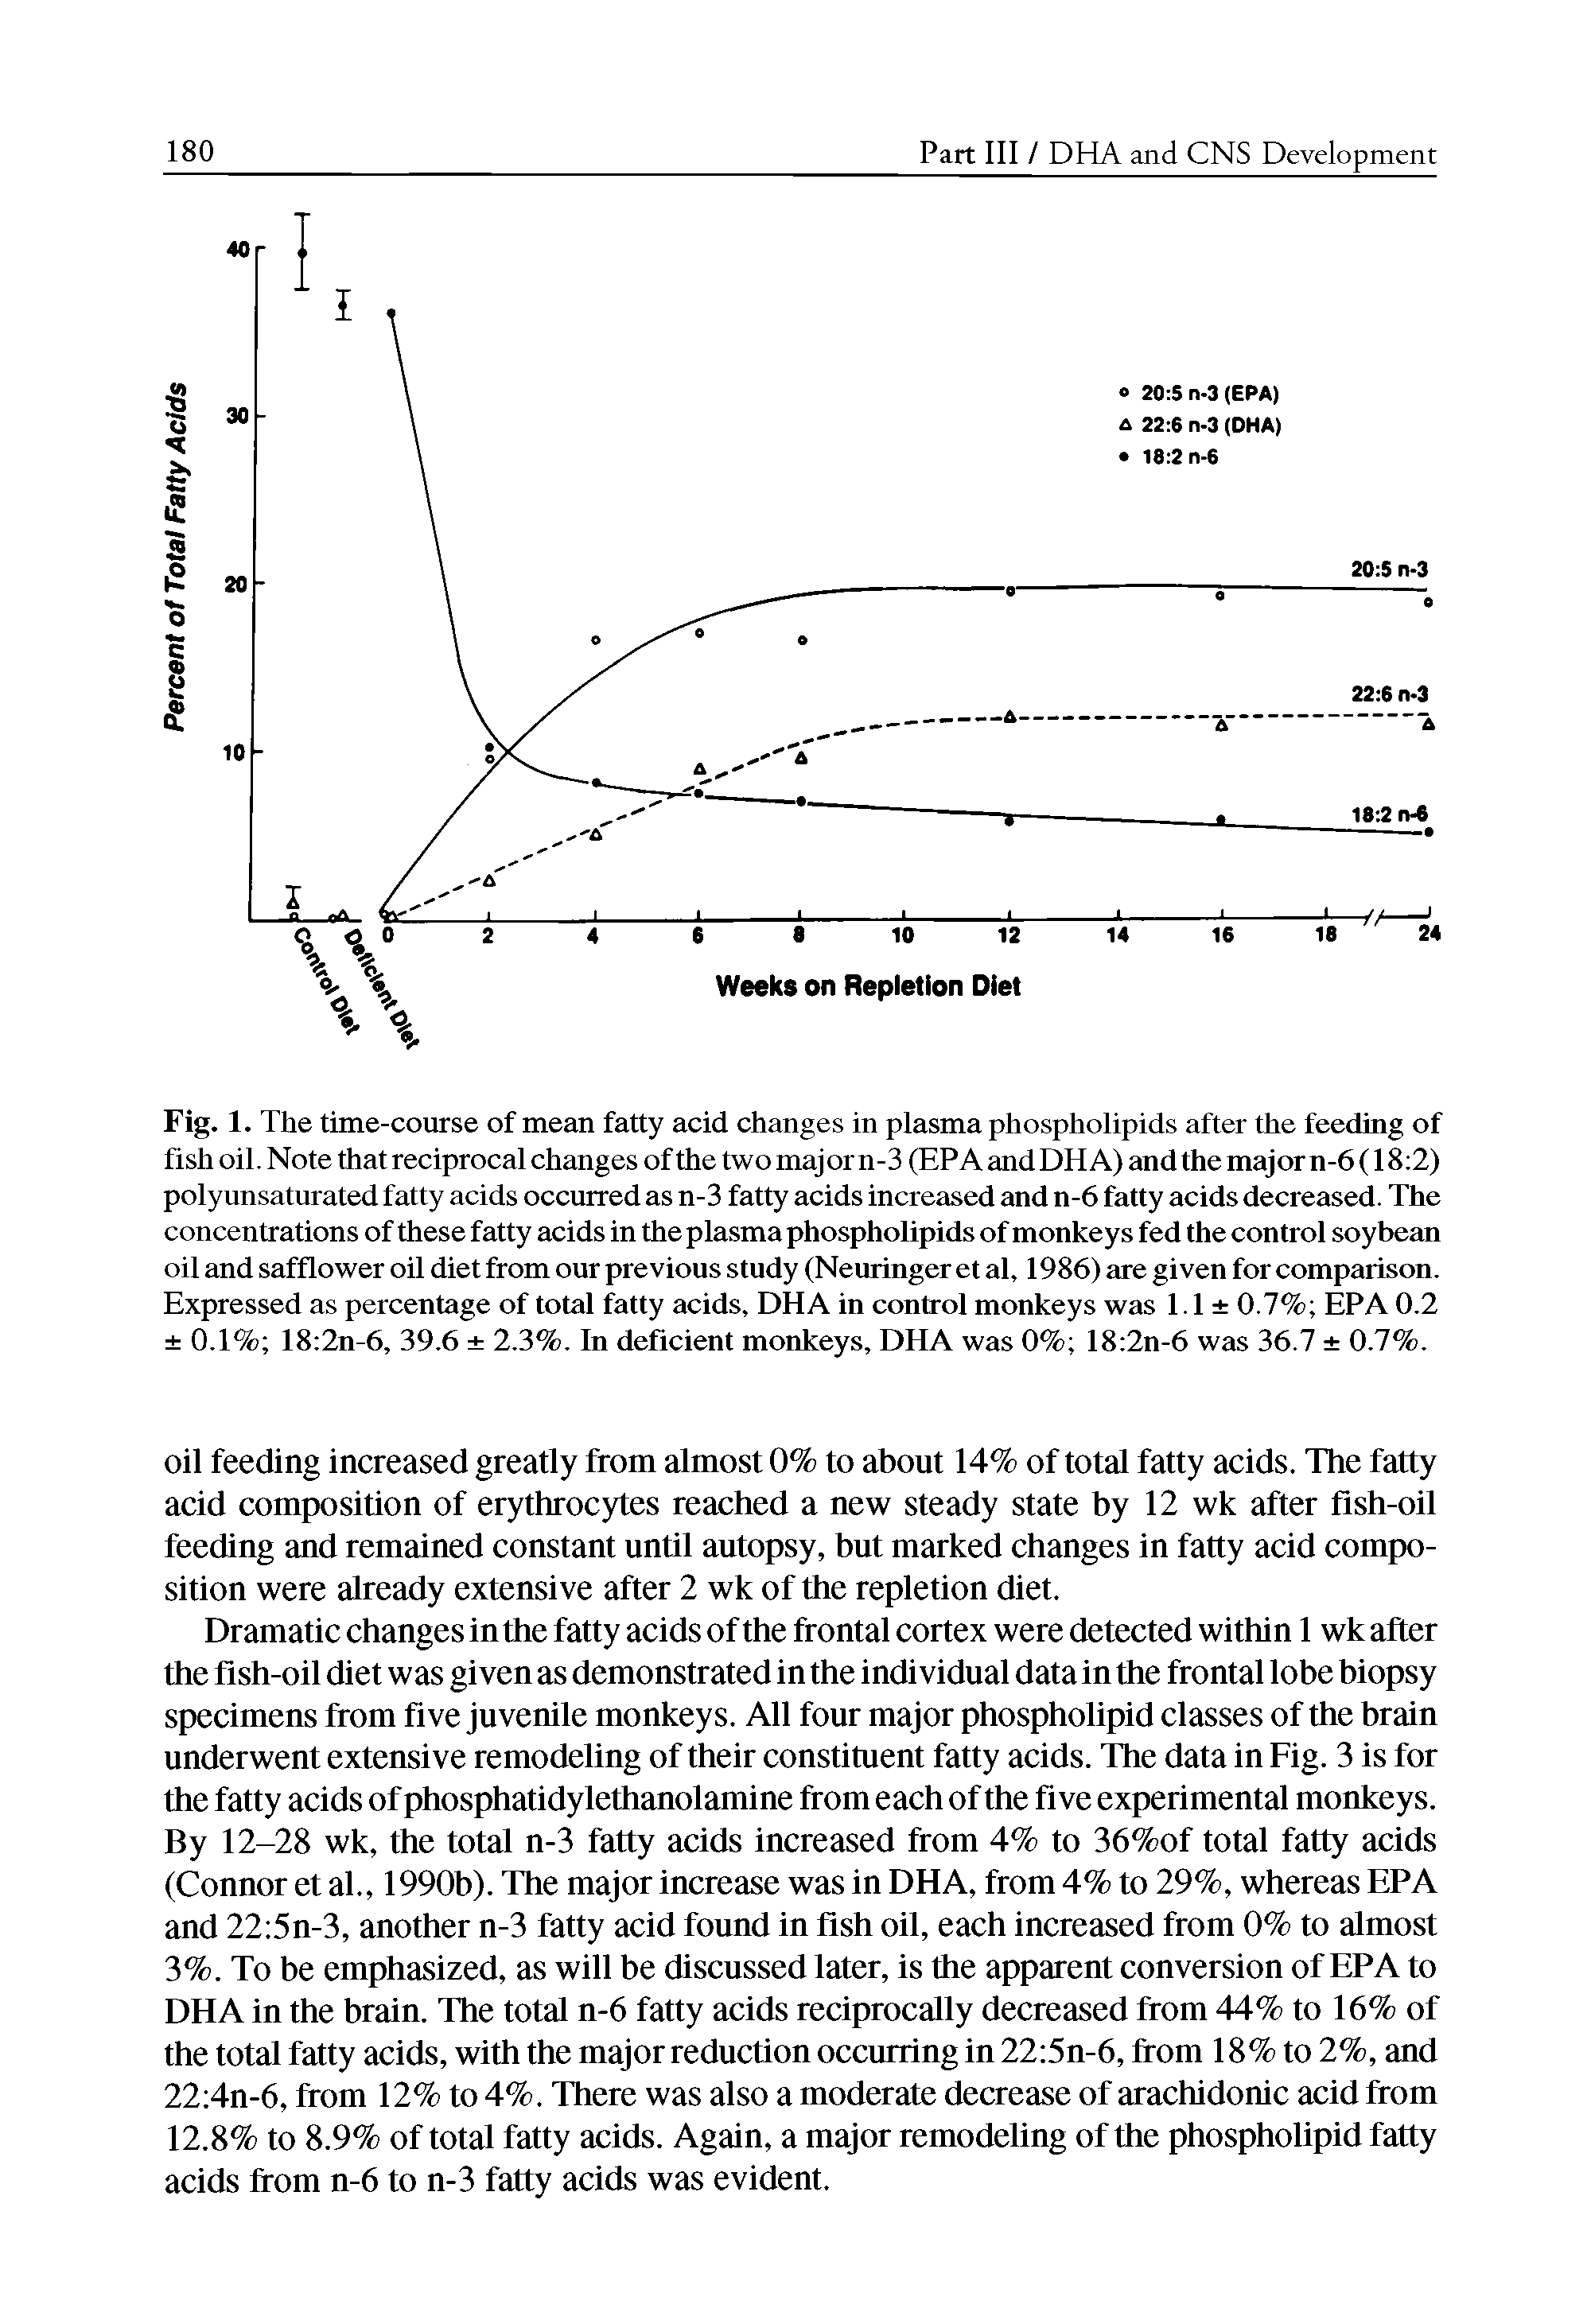 Fig. 1. The time-course of mean fatty acid changes in plasma phospholipids after the feeding of fish oil. Note that reciprocal changes ofthe two major n-3 (EPA andDH A) and the major n-6 (18 2) polyunsaturated fatty acids occurred as n-3 fatty acids increased and n-6 fatty acids decreased. The concentrations of these fatty acids in the plasma phospholipids of monkeys fed the control soybean oil and safflower oil diet from our previous study (Neuringer et al, 1986) are given for comparison. Expressed as percentage of total fatty acids, DHA in control monkeys was 1.1 0.7% EPA 0.2 0.1% 18 2n-6, 39.6 2.3%. In deficient monkeys, DHA was 0% 18 2n-6 was 36.7 0.7%.